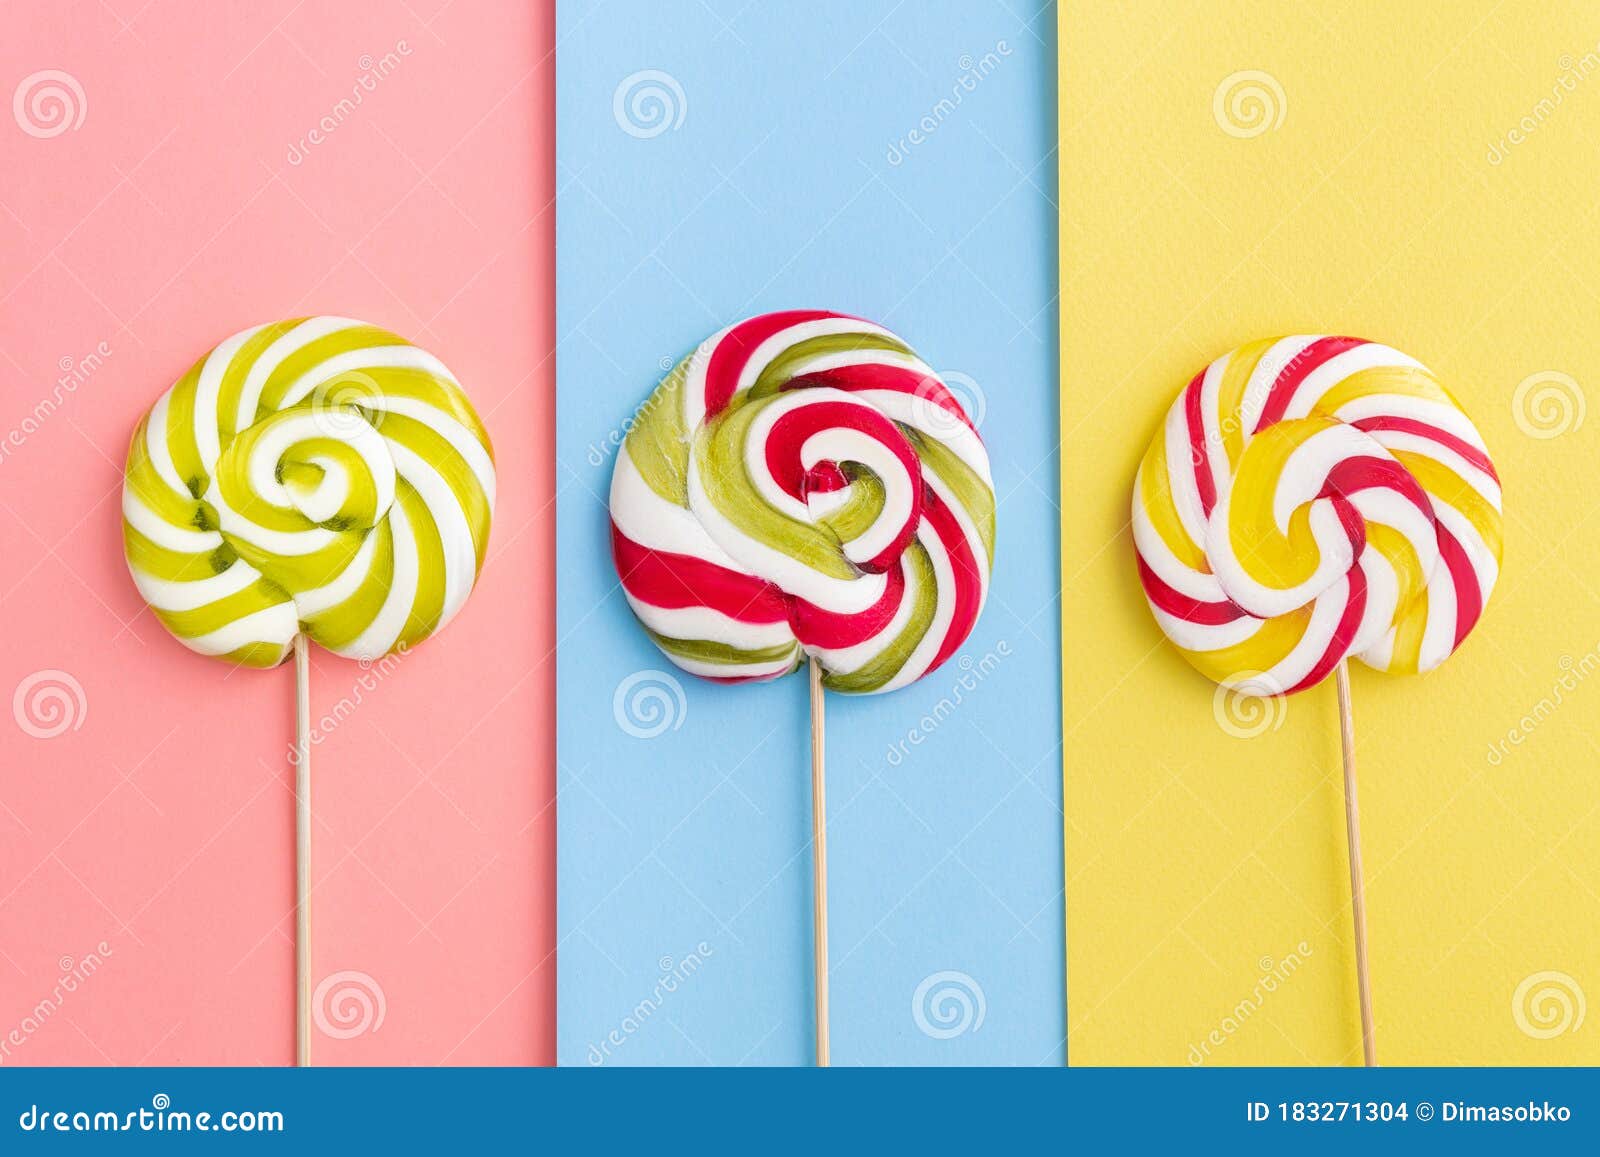 Lollypops Candy in Trend Pastel Colors Stock Photo - Image of lollipop ...